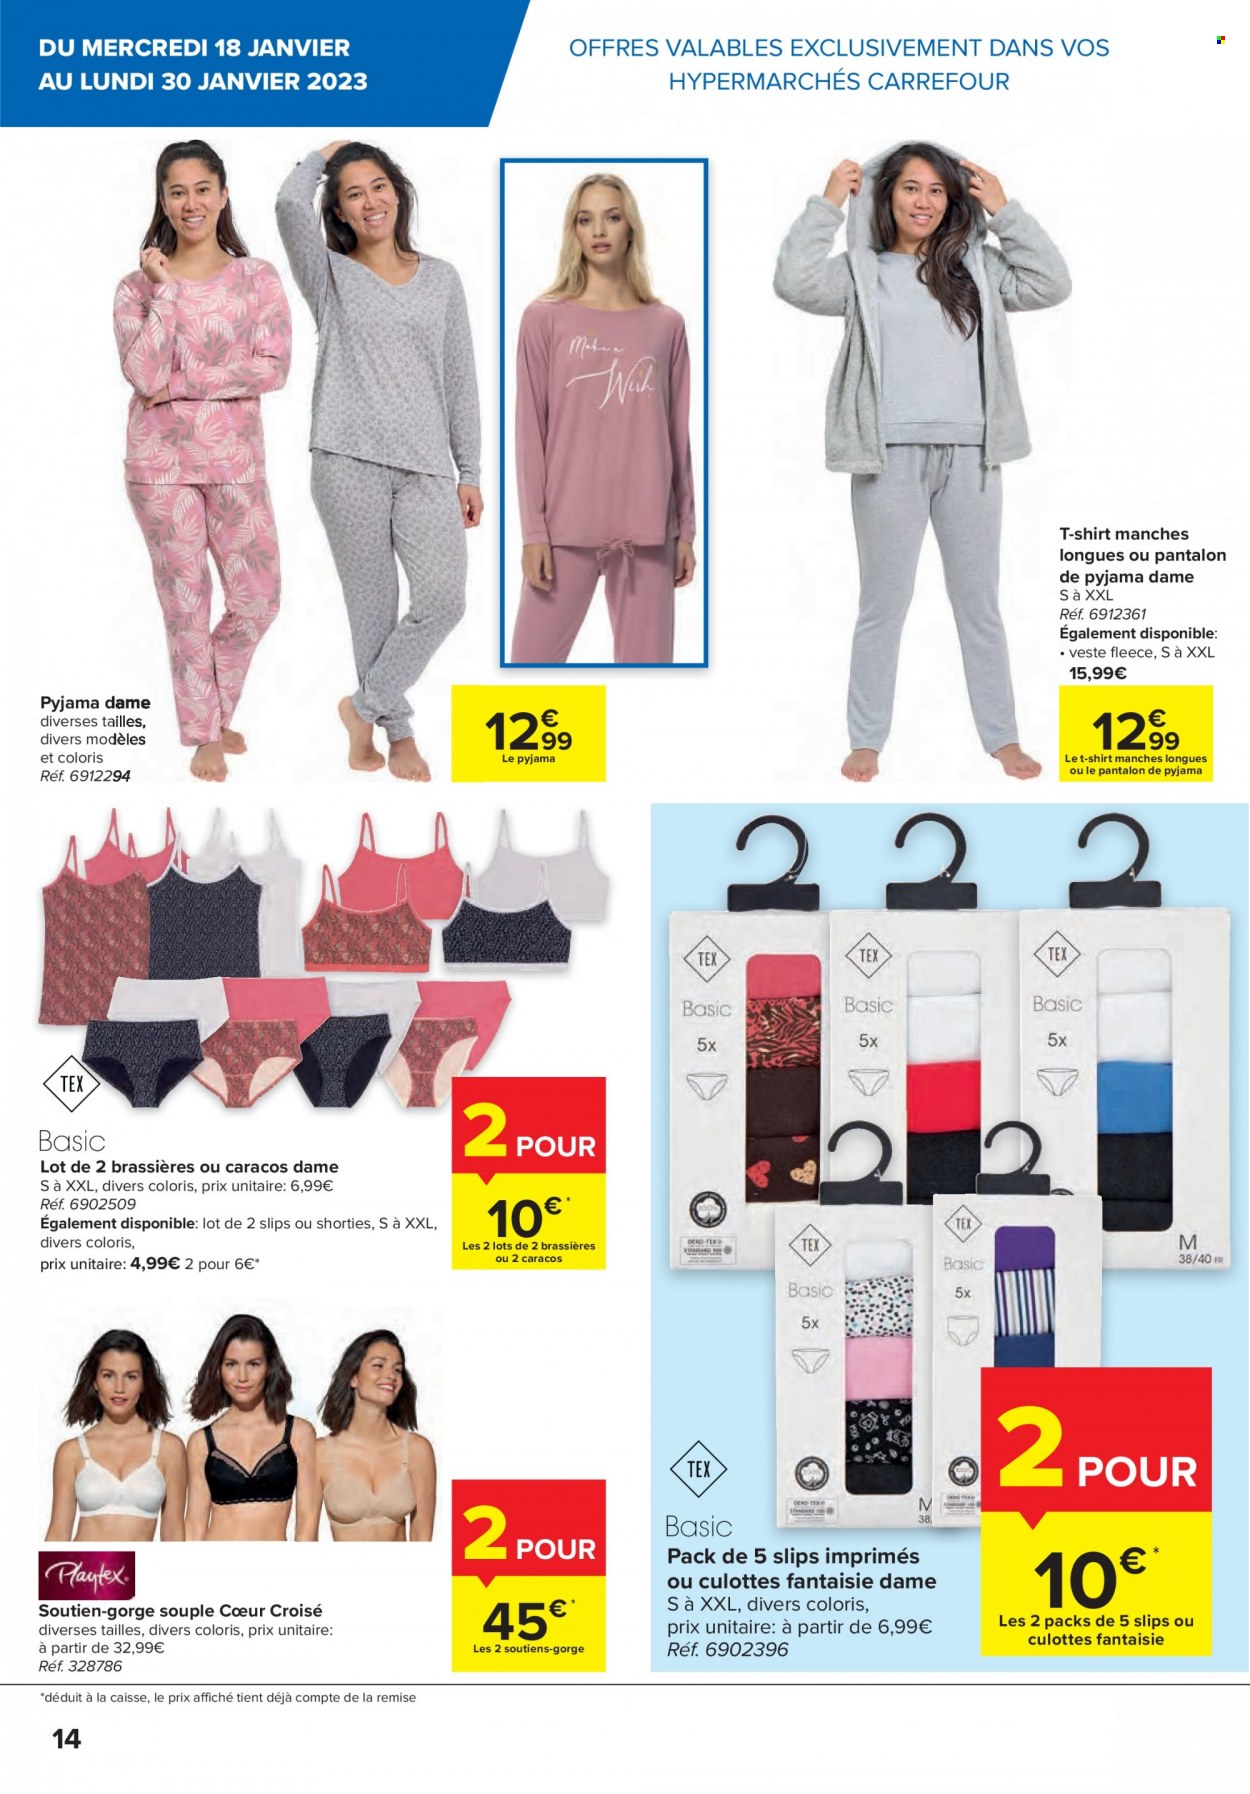 Catalogue Carrefour hypermarkt - 18.1.2023 - 30.1.2023. Page 14.